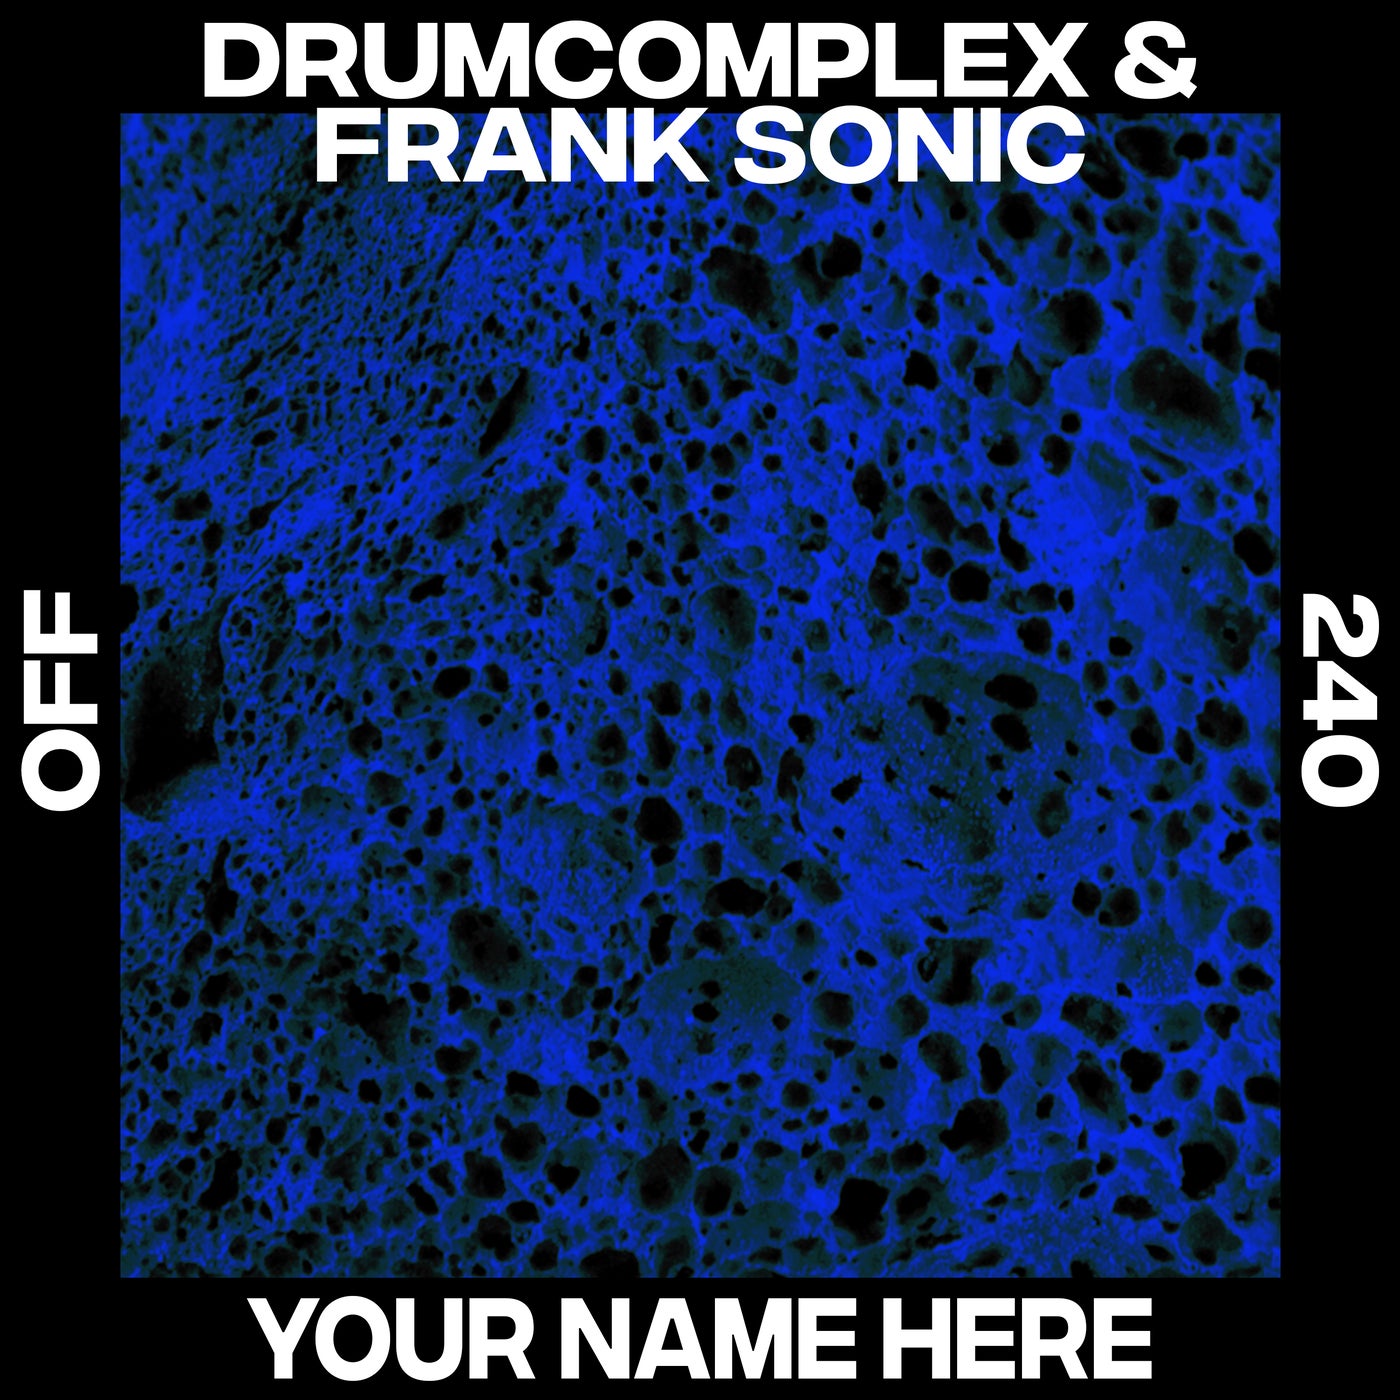 image cover: Drumcomplex, Frank Sonic - Your Name Here / OFF240